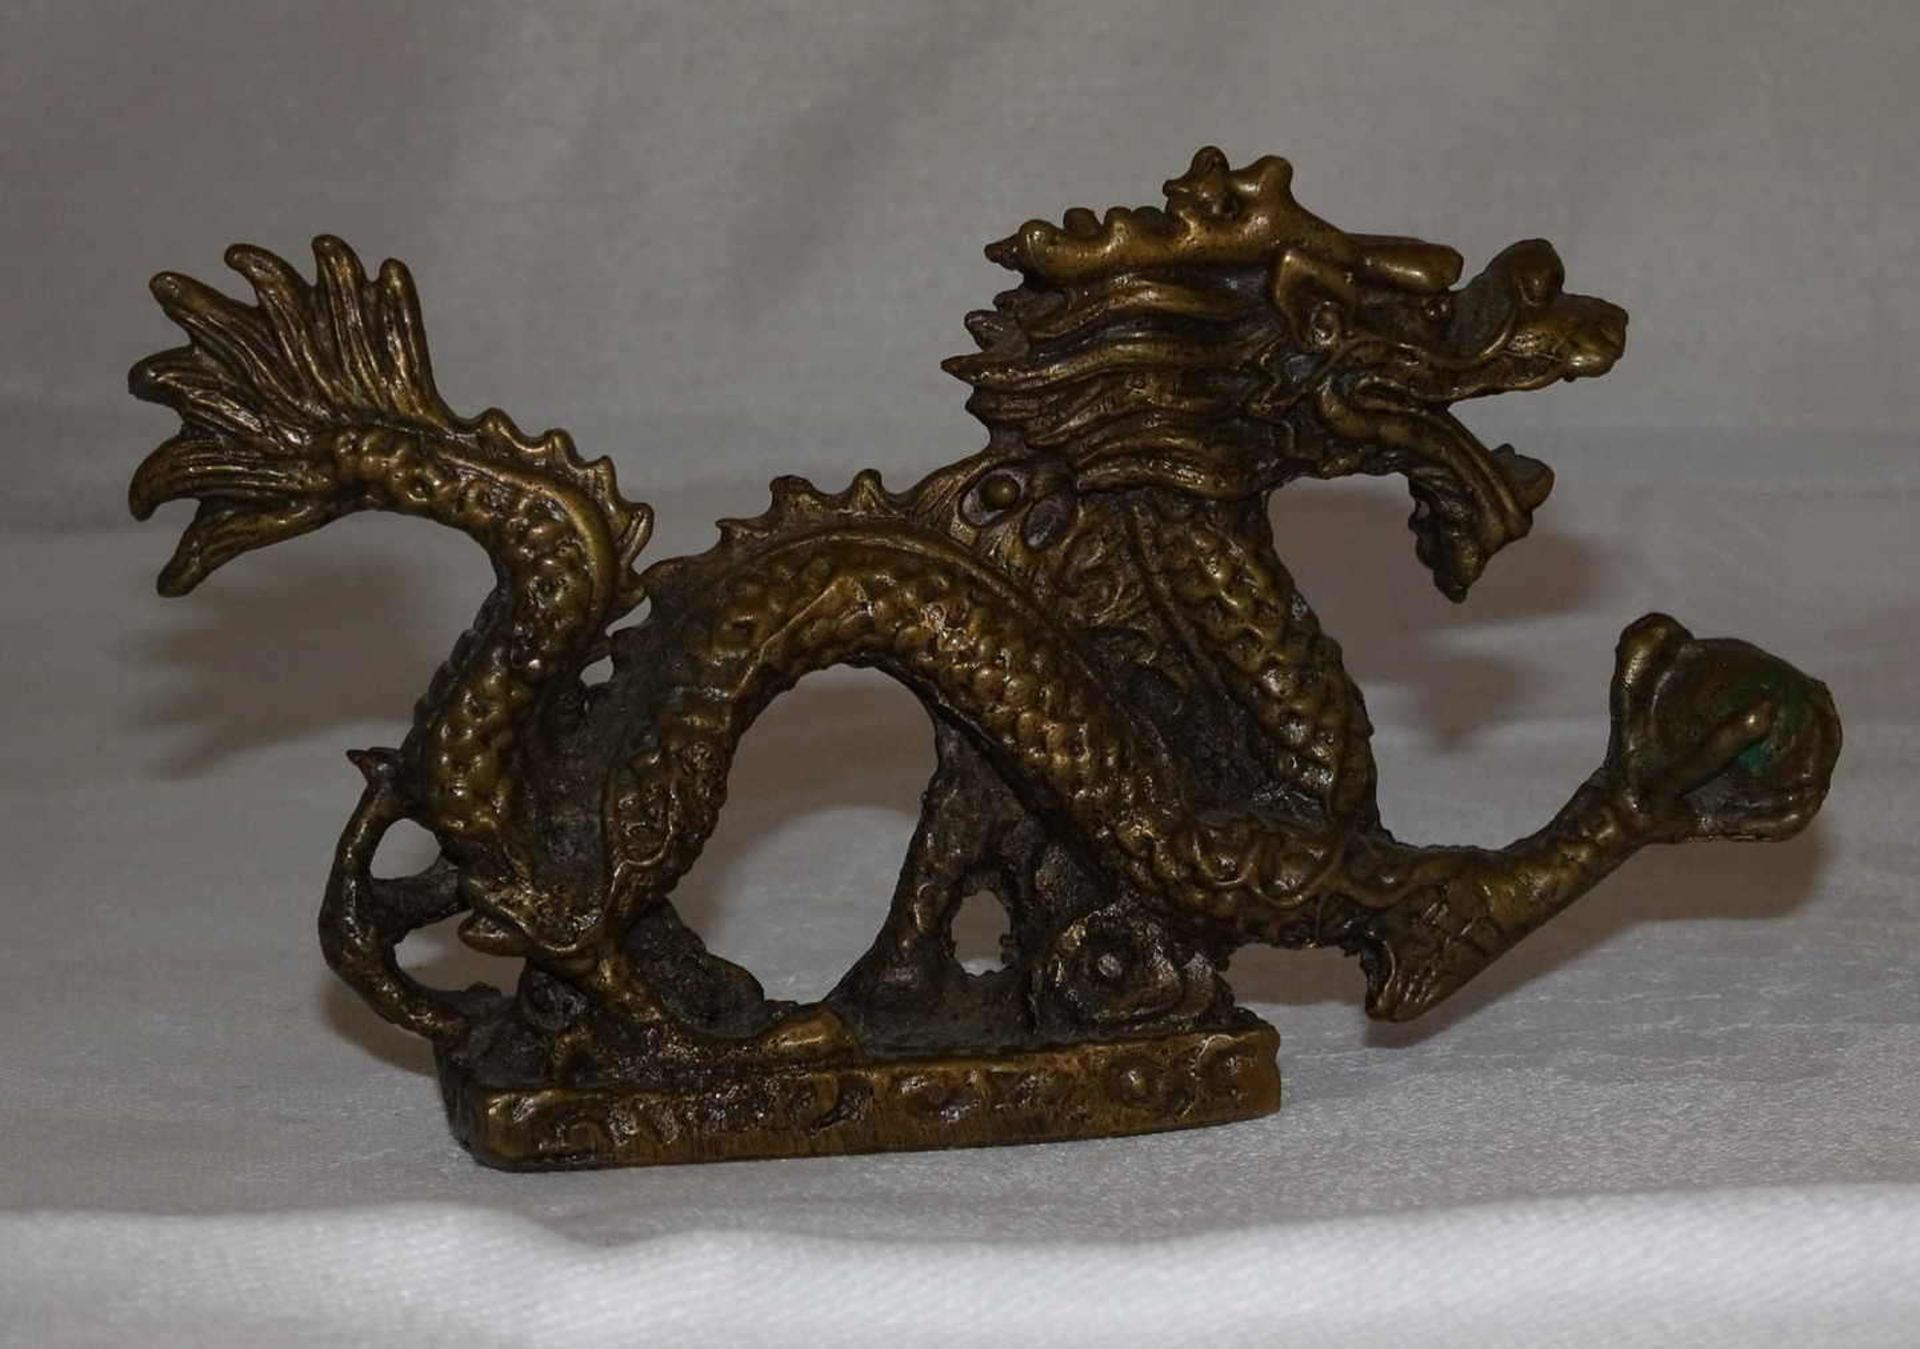 Chinese lucky dragon made of brass. Length about 10.5 cm